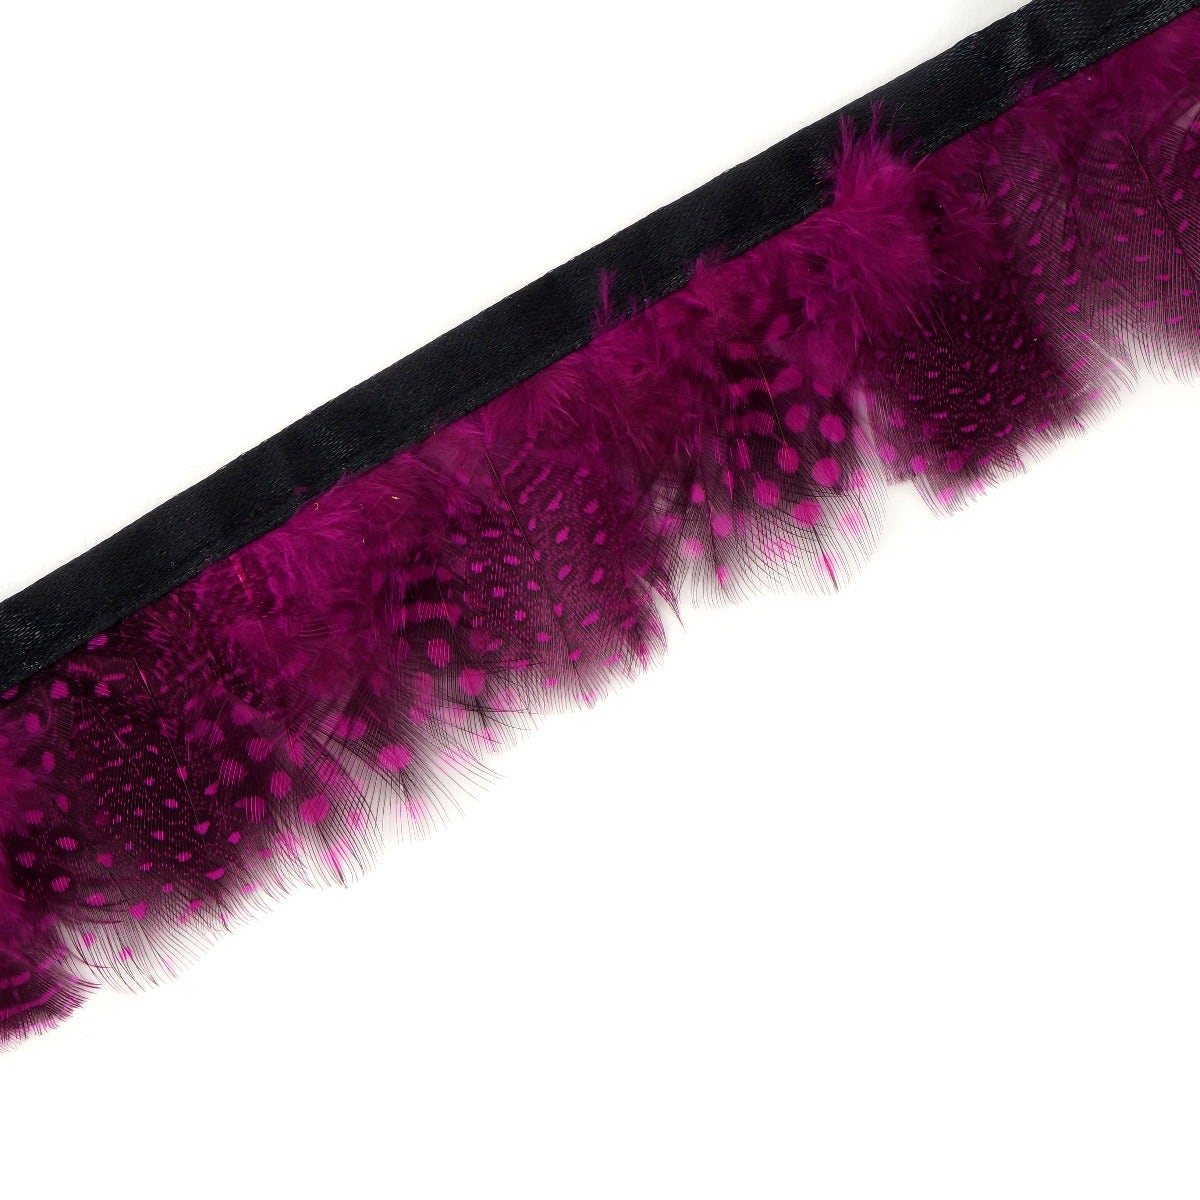 Guinea Plumage Feather Fringe - 1.75 - 1 Yard - Very Berry